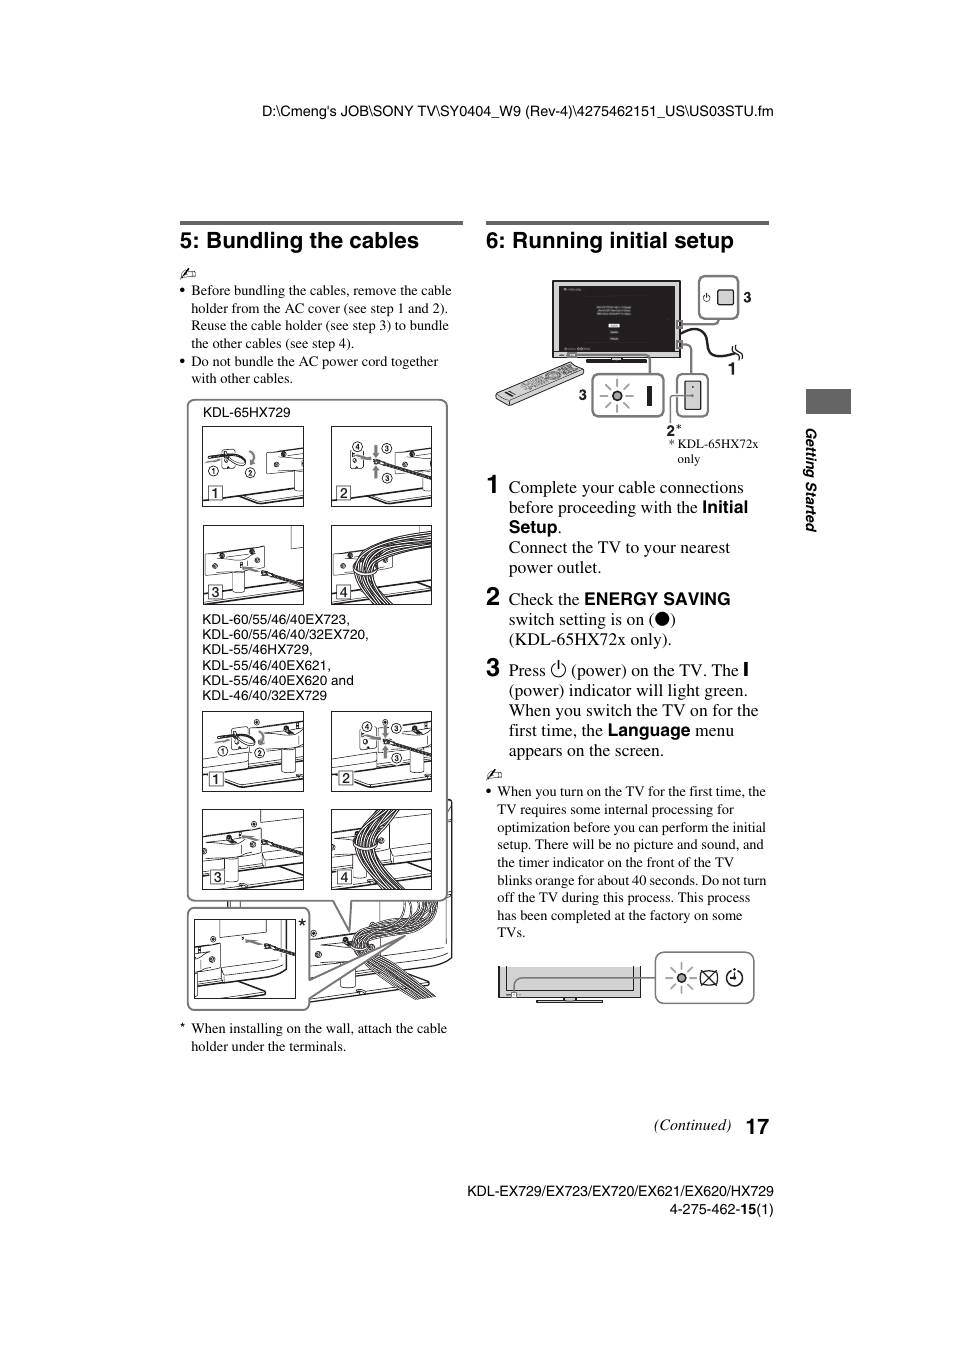 Bundling the cables, Running initial setup, Bundling the cables 6: running initial setup | Sony KDL-46EX621 User Manual | Page 17 / 36